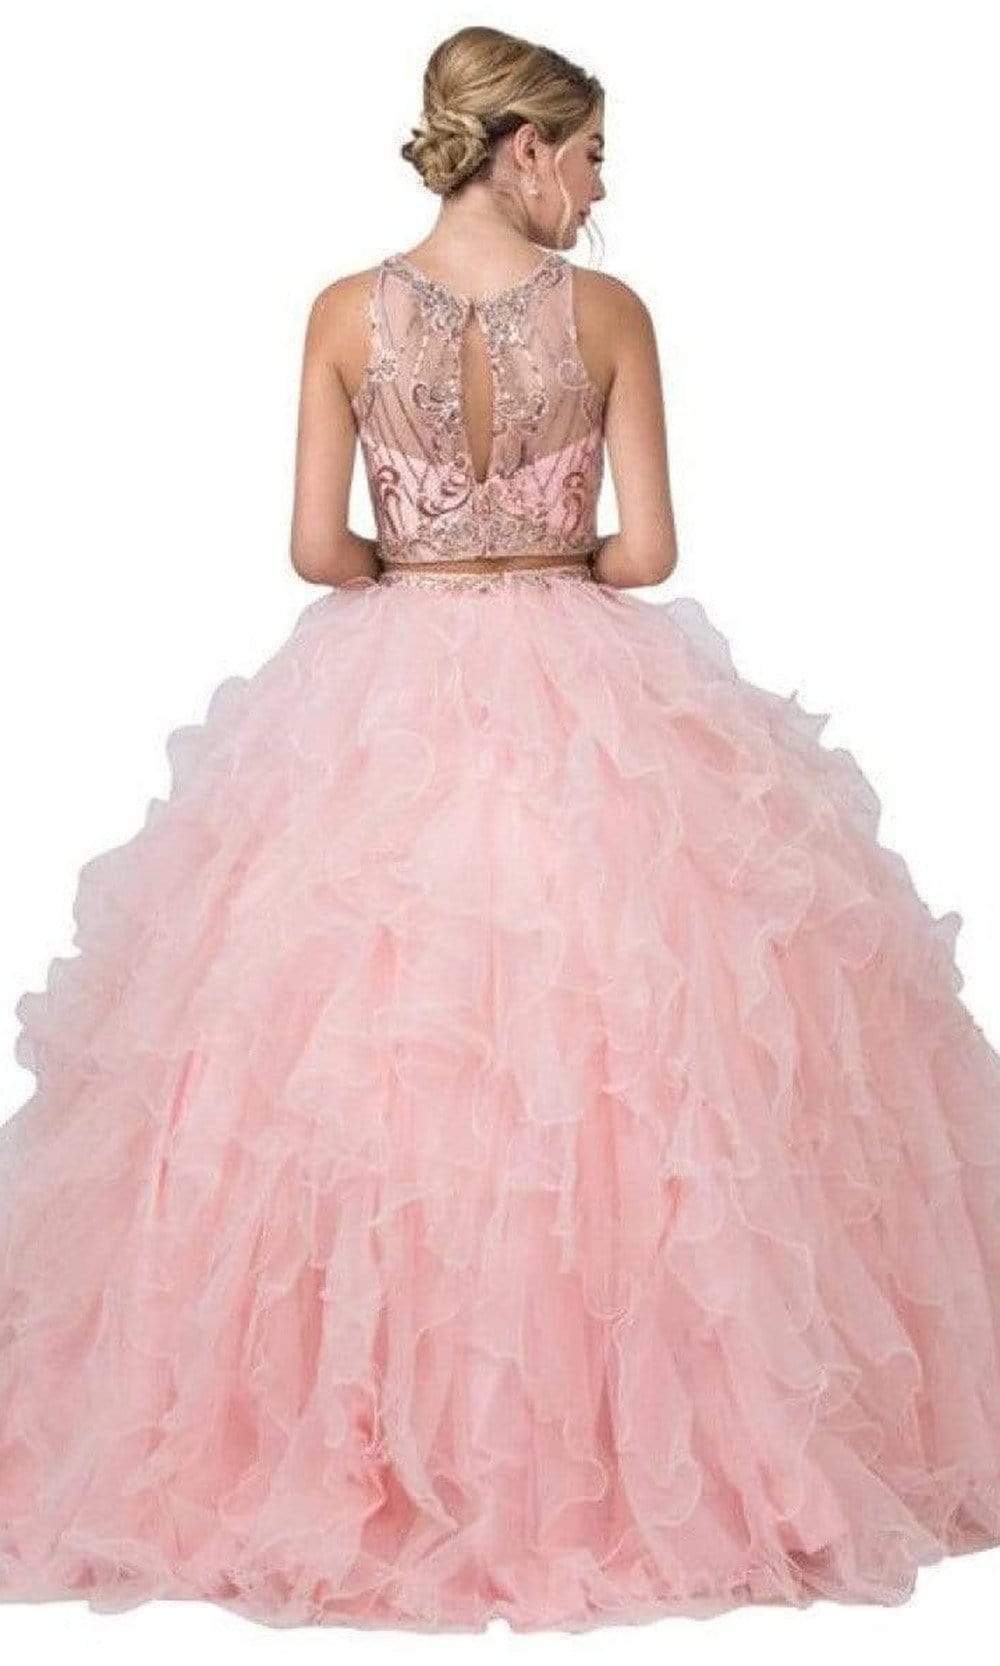 Aspeed Design - L2281 Illusion Jewel Two Piece Ball Gown Ball Gowns